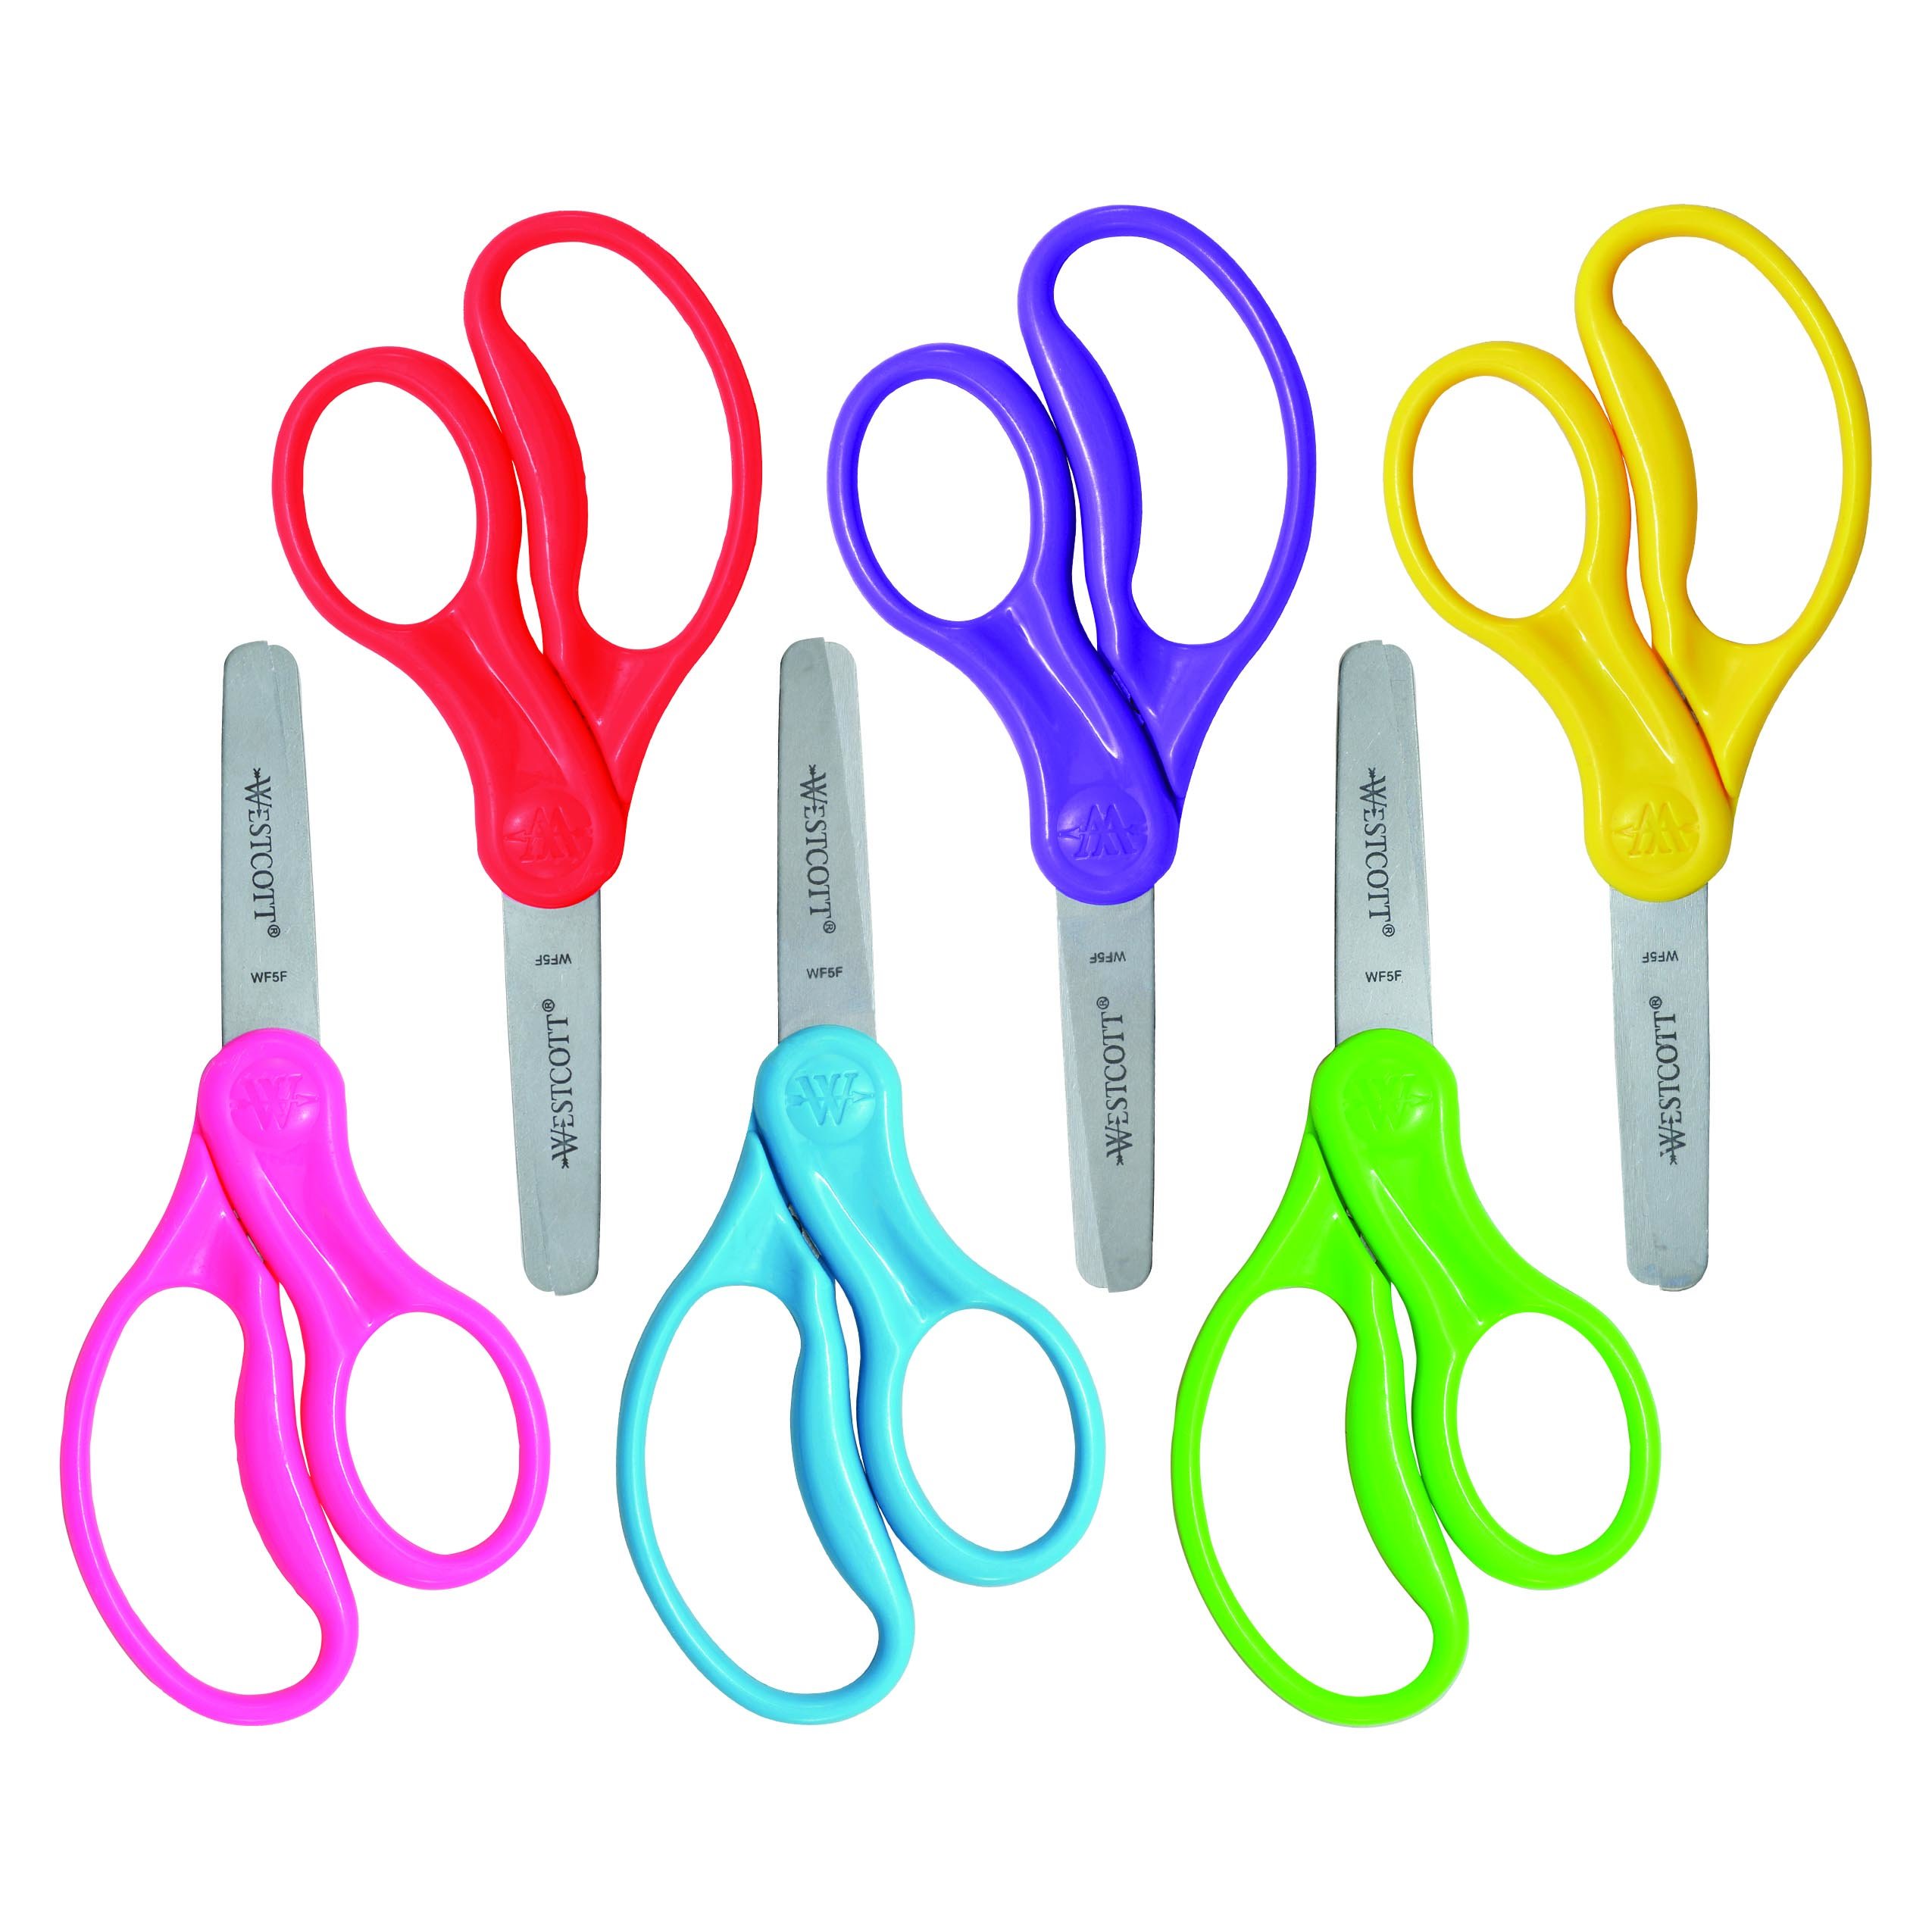 Westcott 16454 Right- and Left-Handed Scissors, Kids' Scissors, Ages 4-8, 5-Inch Blunt Tip, Assorted, 6 Pack